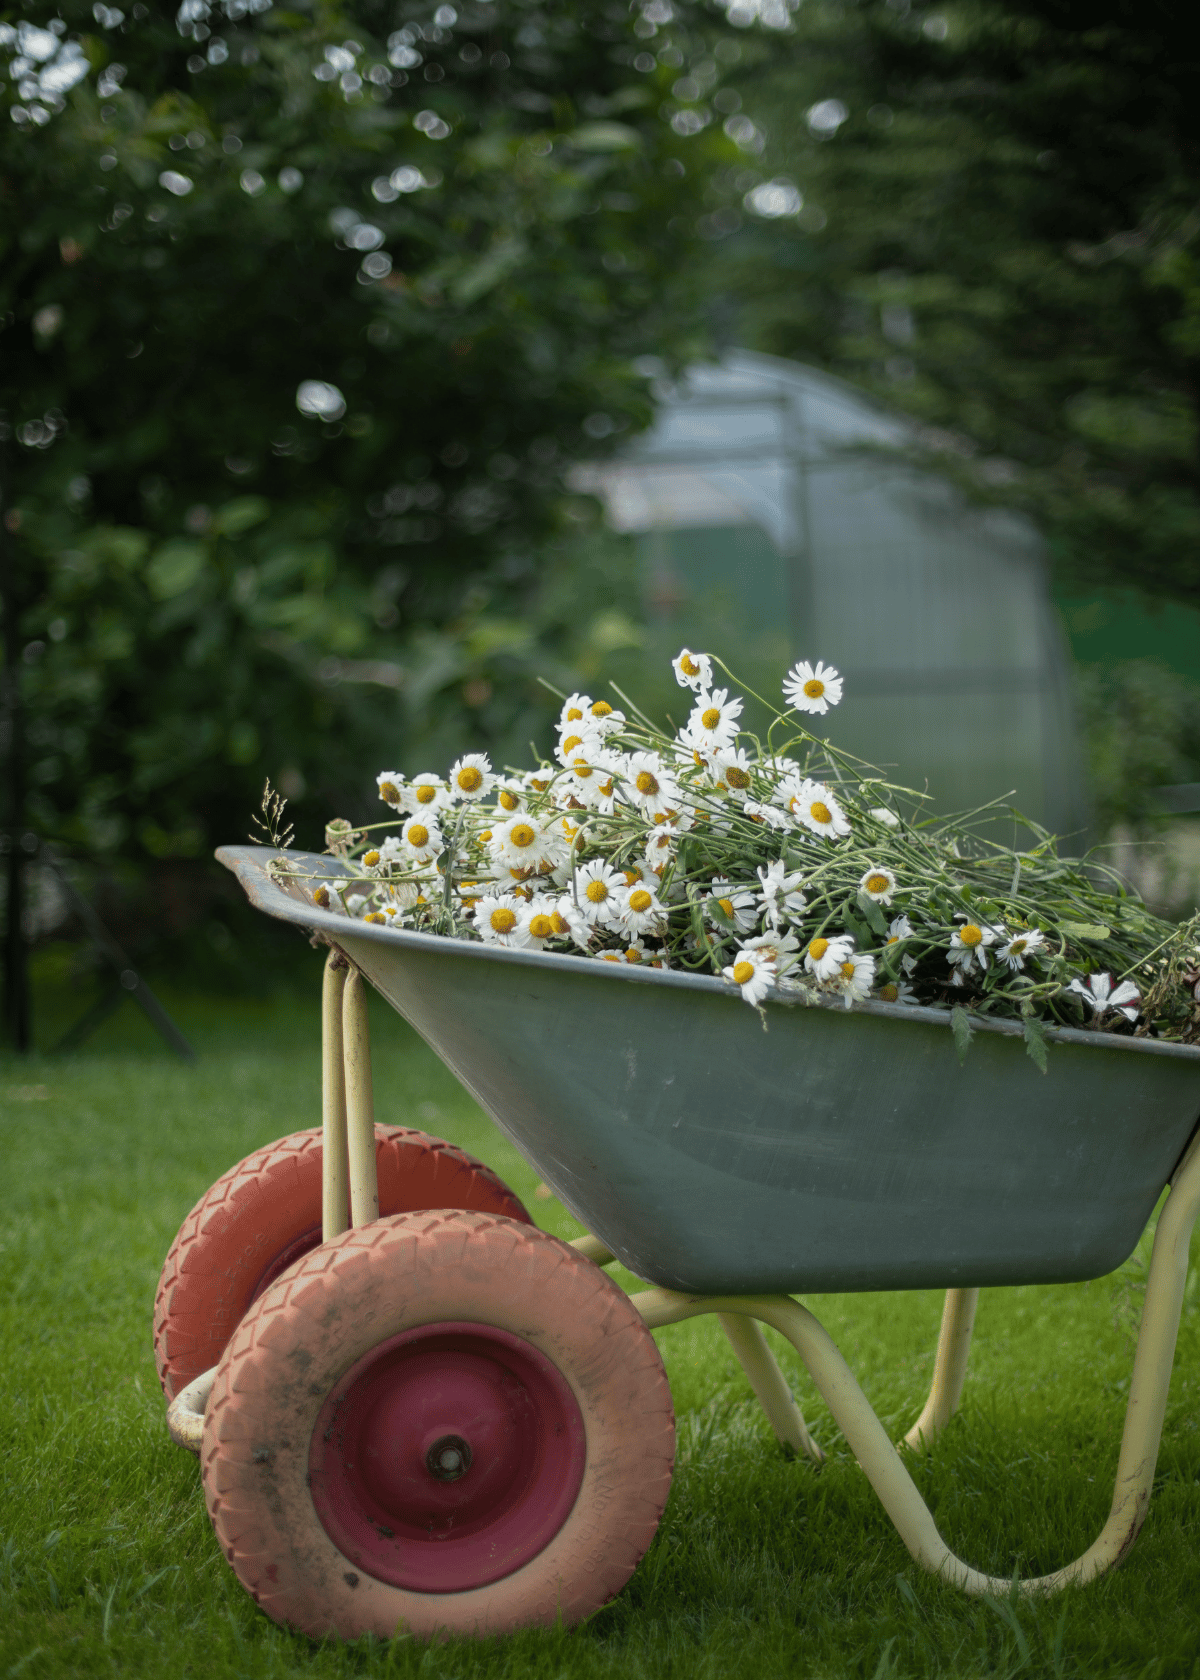 The 5 Best Wheelbarrow for Every Gardening, Landscaping and Home Improvement Need! Durable, Easy to Maneuver and Perfectly Balanced - Here’s Why It’s the Best!